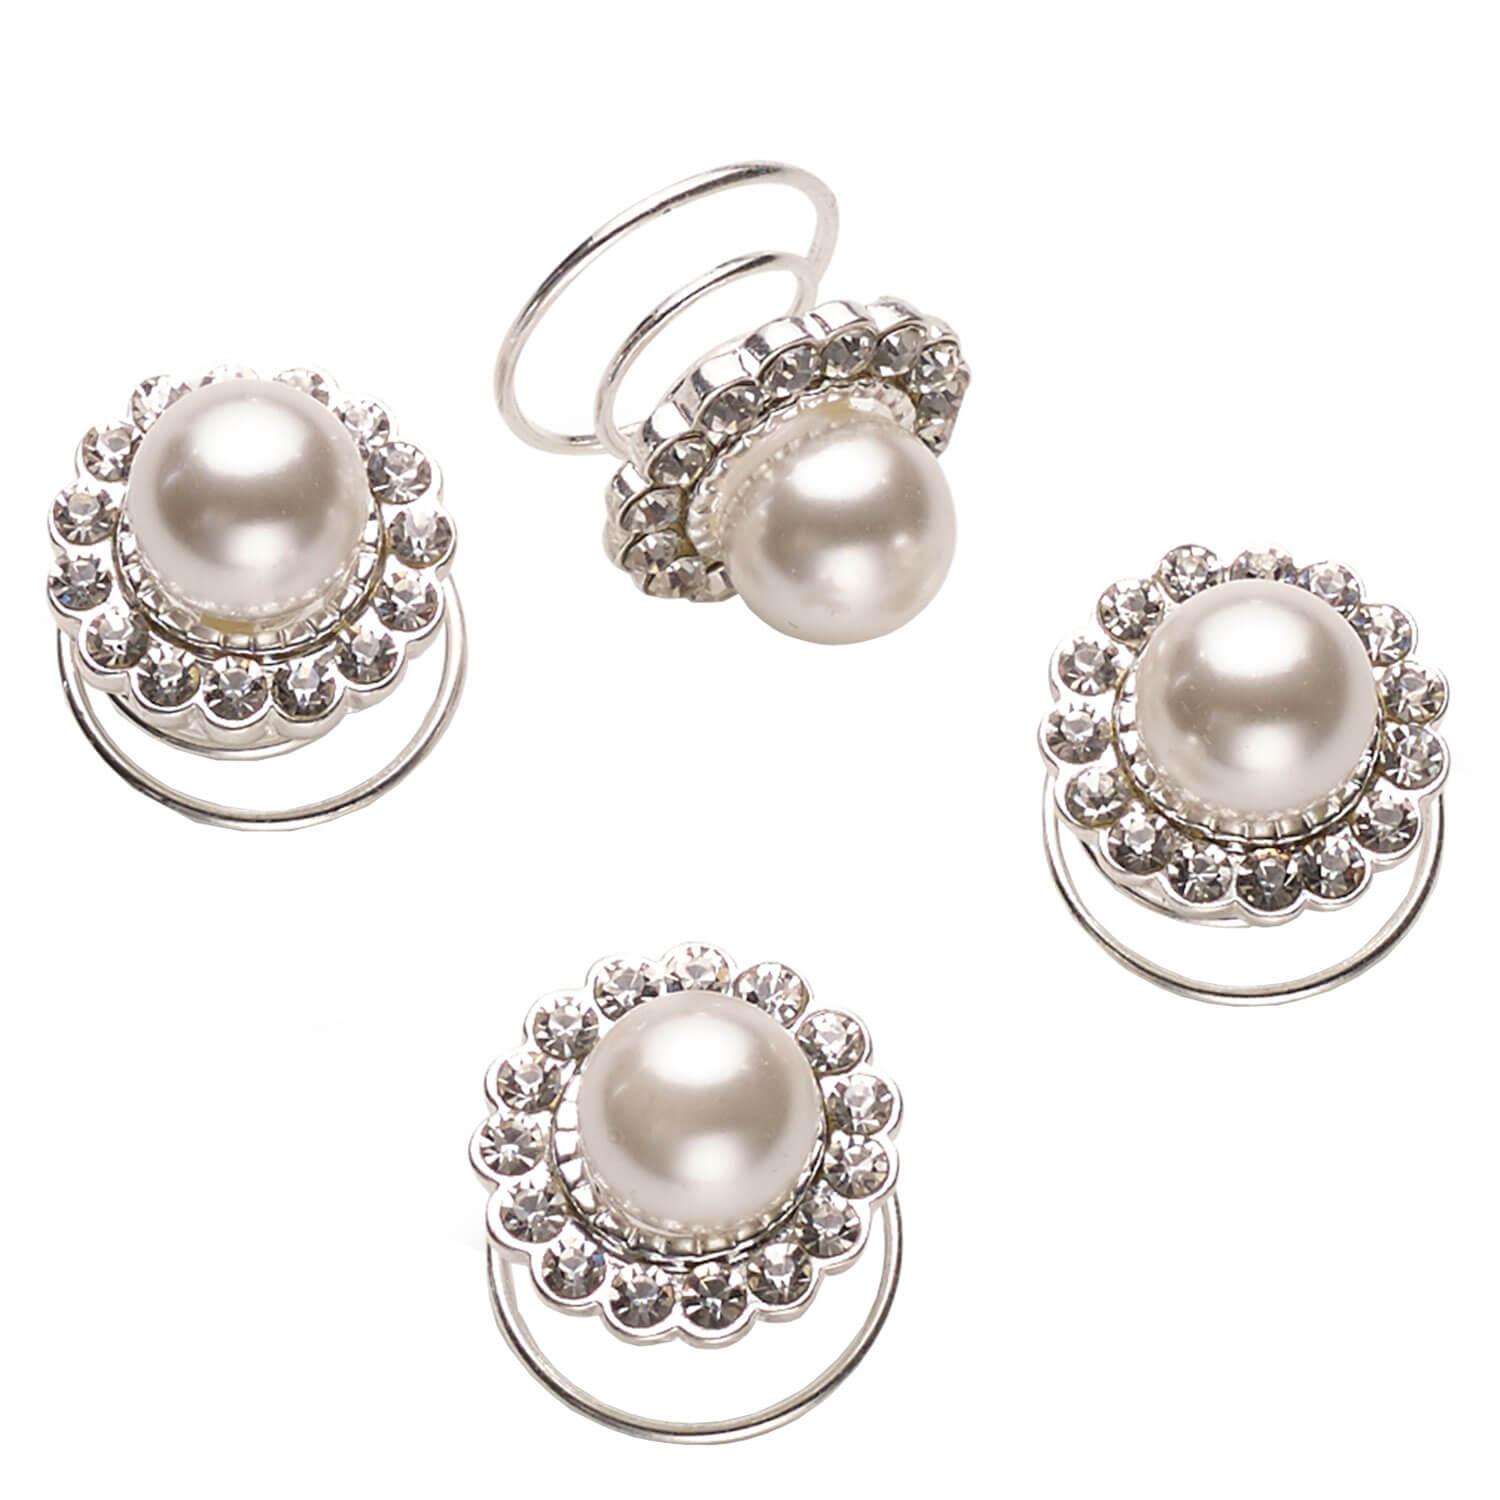 Celebride - Curlies With Pearls And Rhinestones